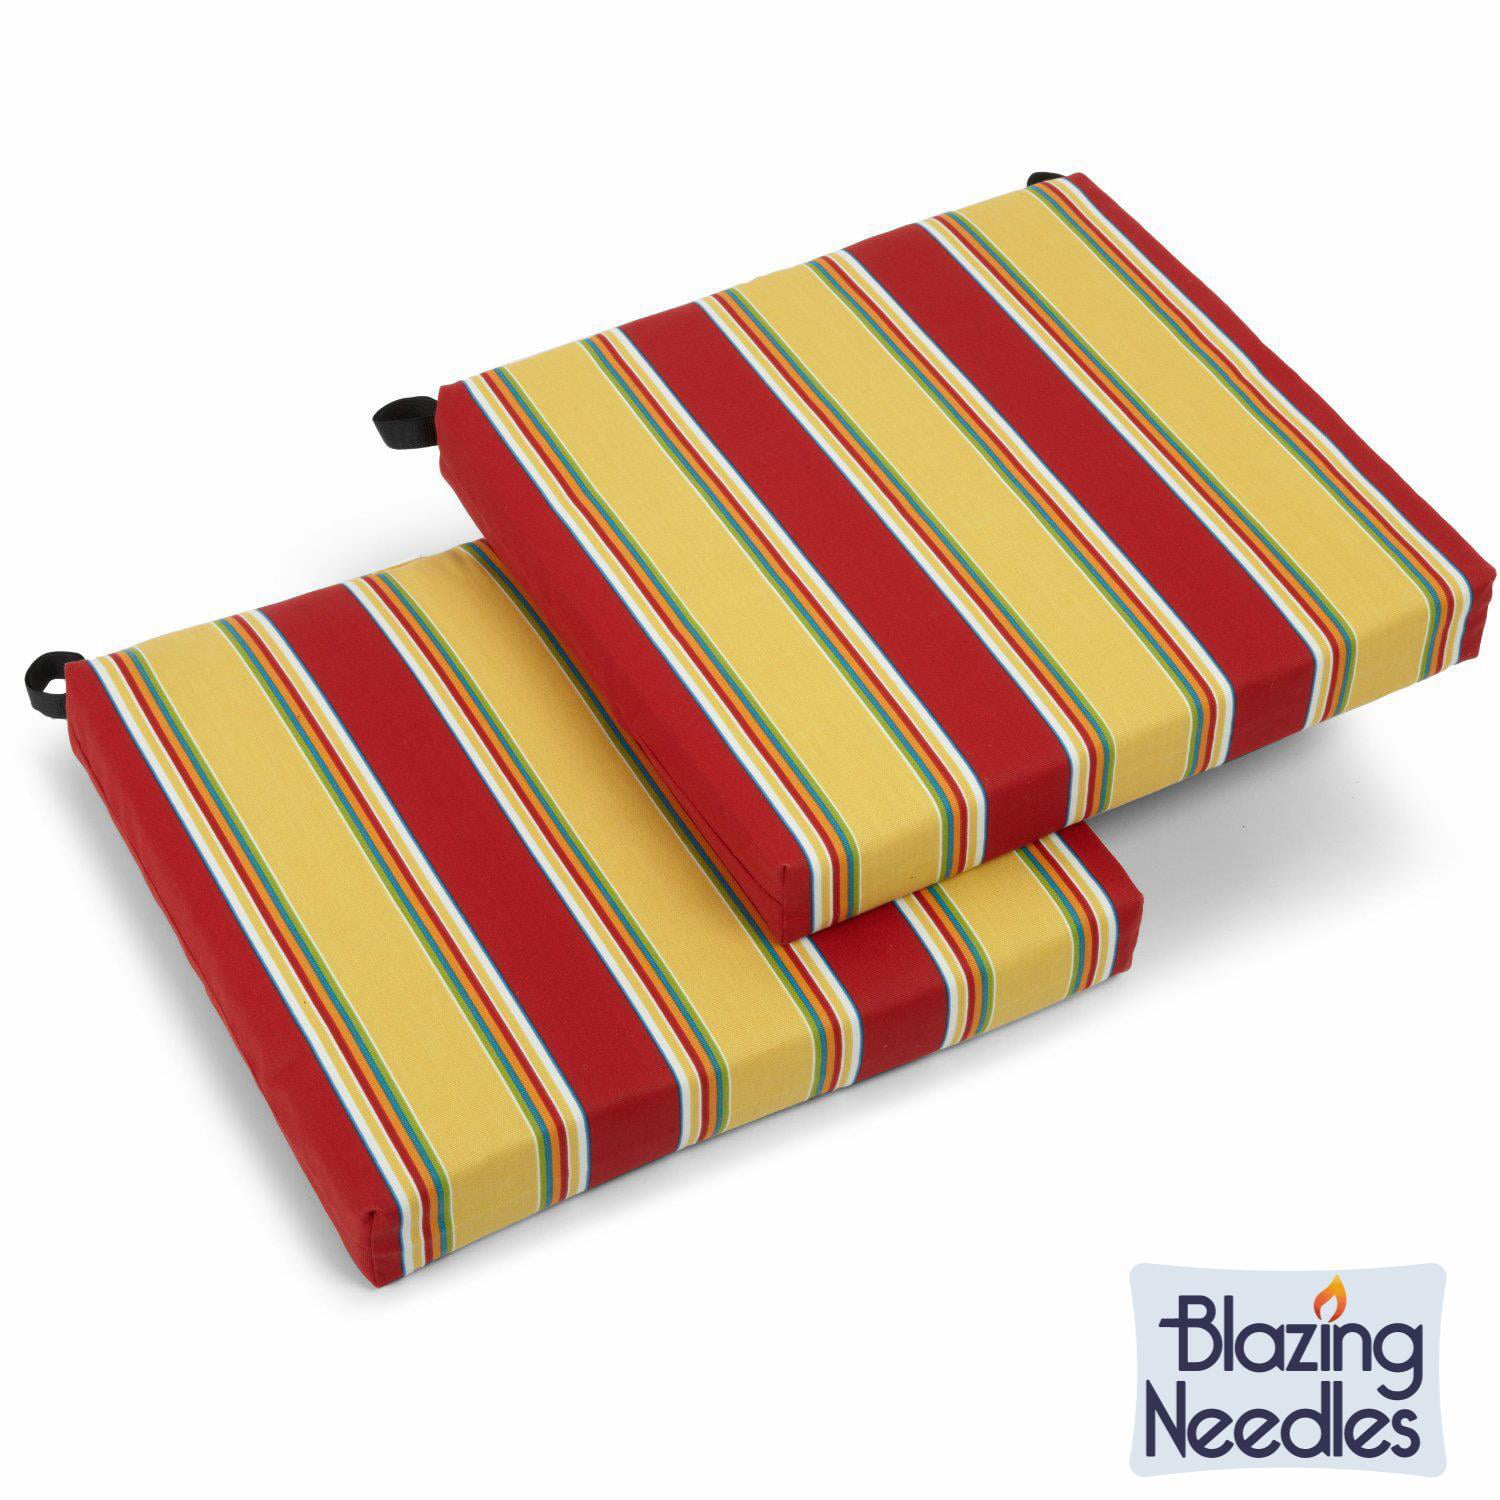 Blazing Needles 93454-2CH-REO-27 20 x 19 in. Patterned Outdoor Spun Polyester Chair Cushions&#44; Haliwell Multi - Set of 2